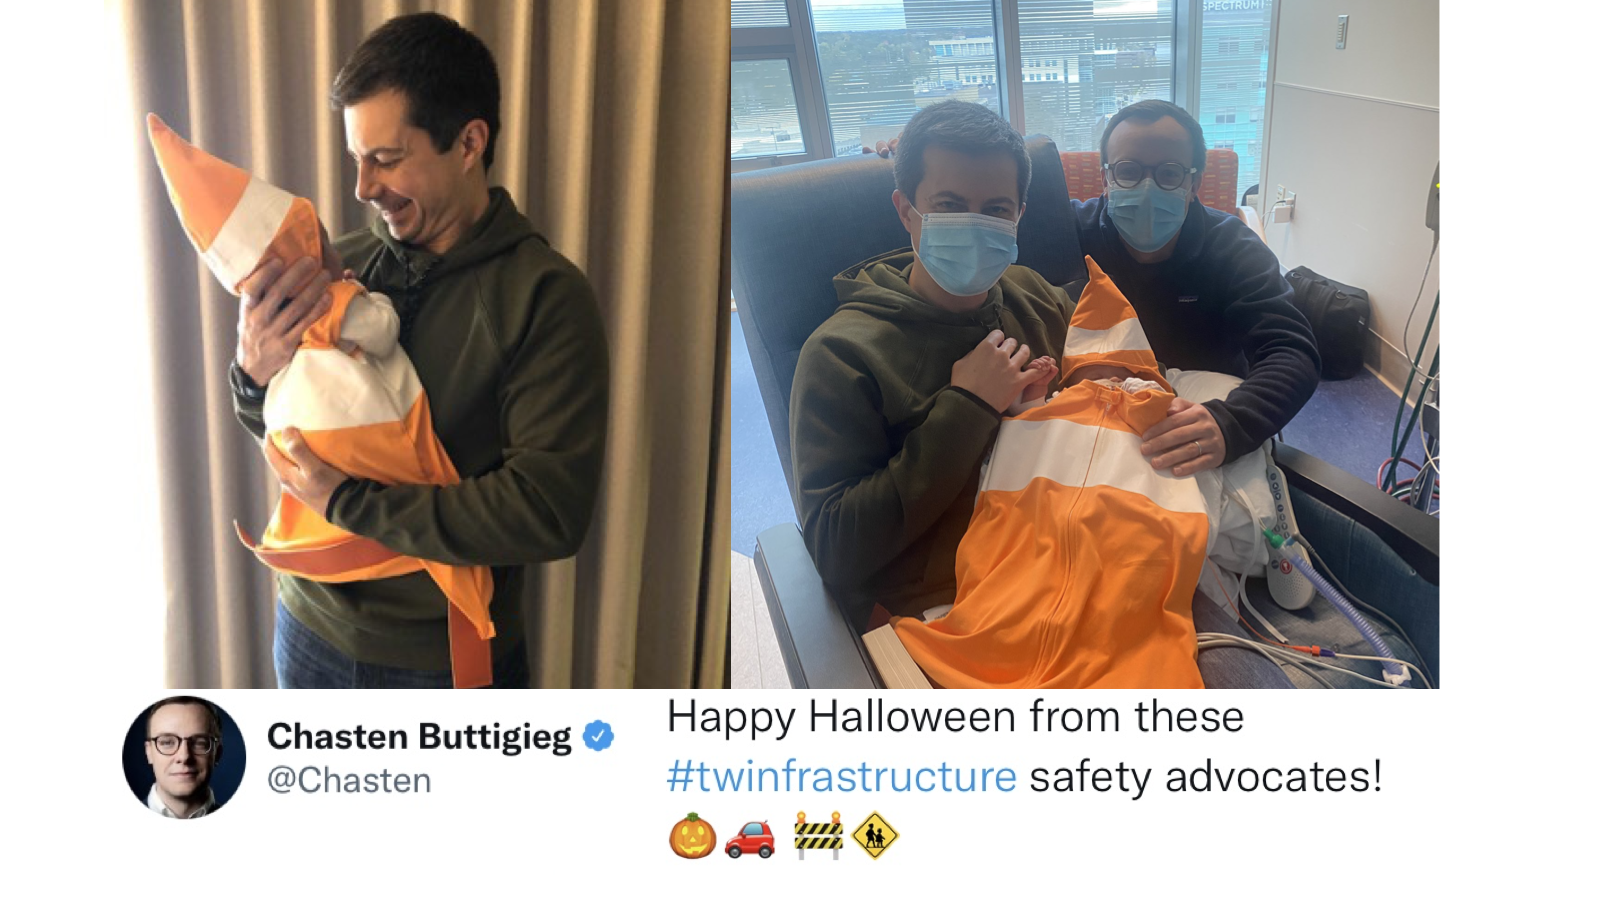 Pete, Chasten, and one of their two twin children dressed as "twinfrastructure" for Halloween